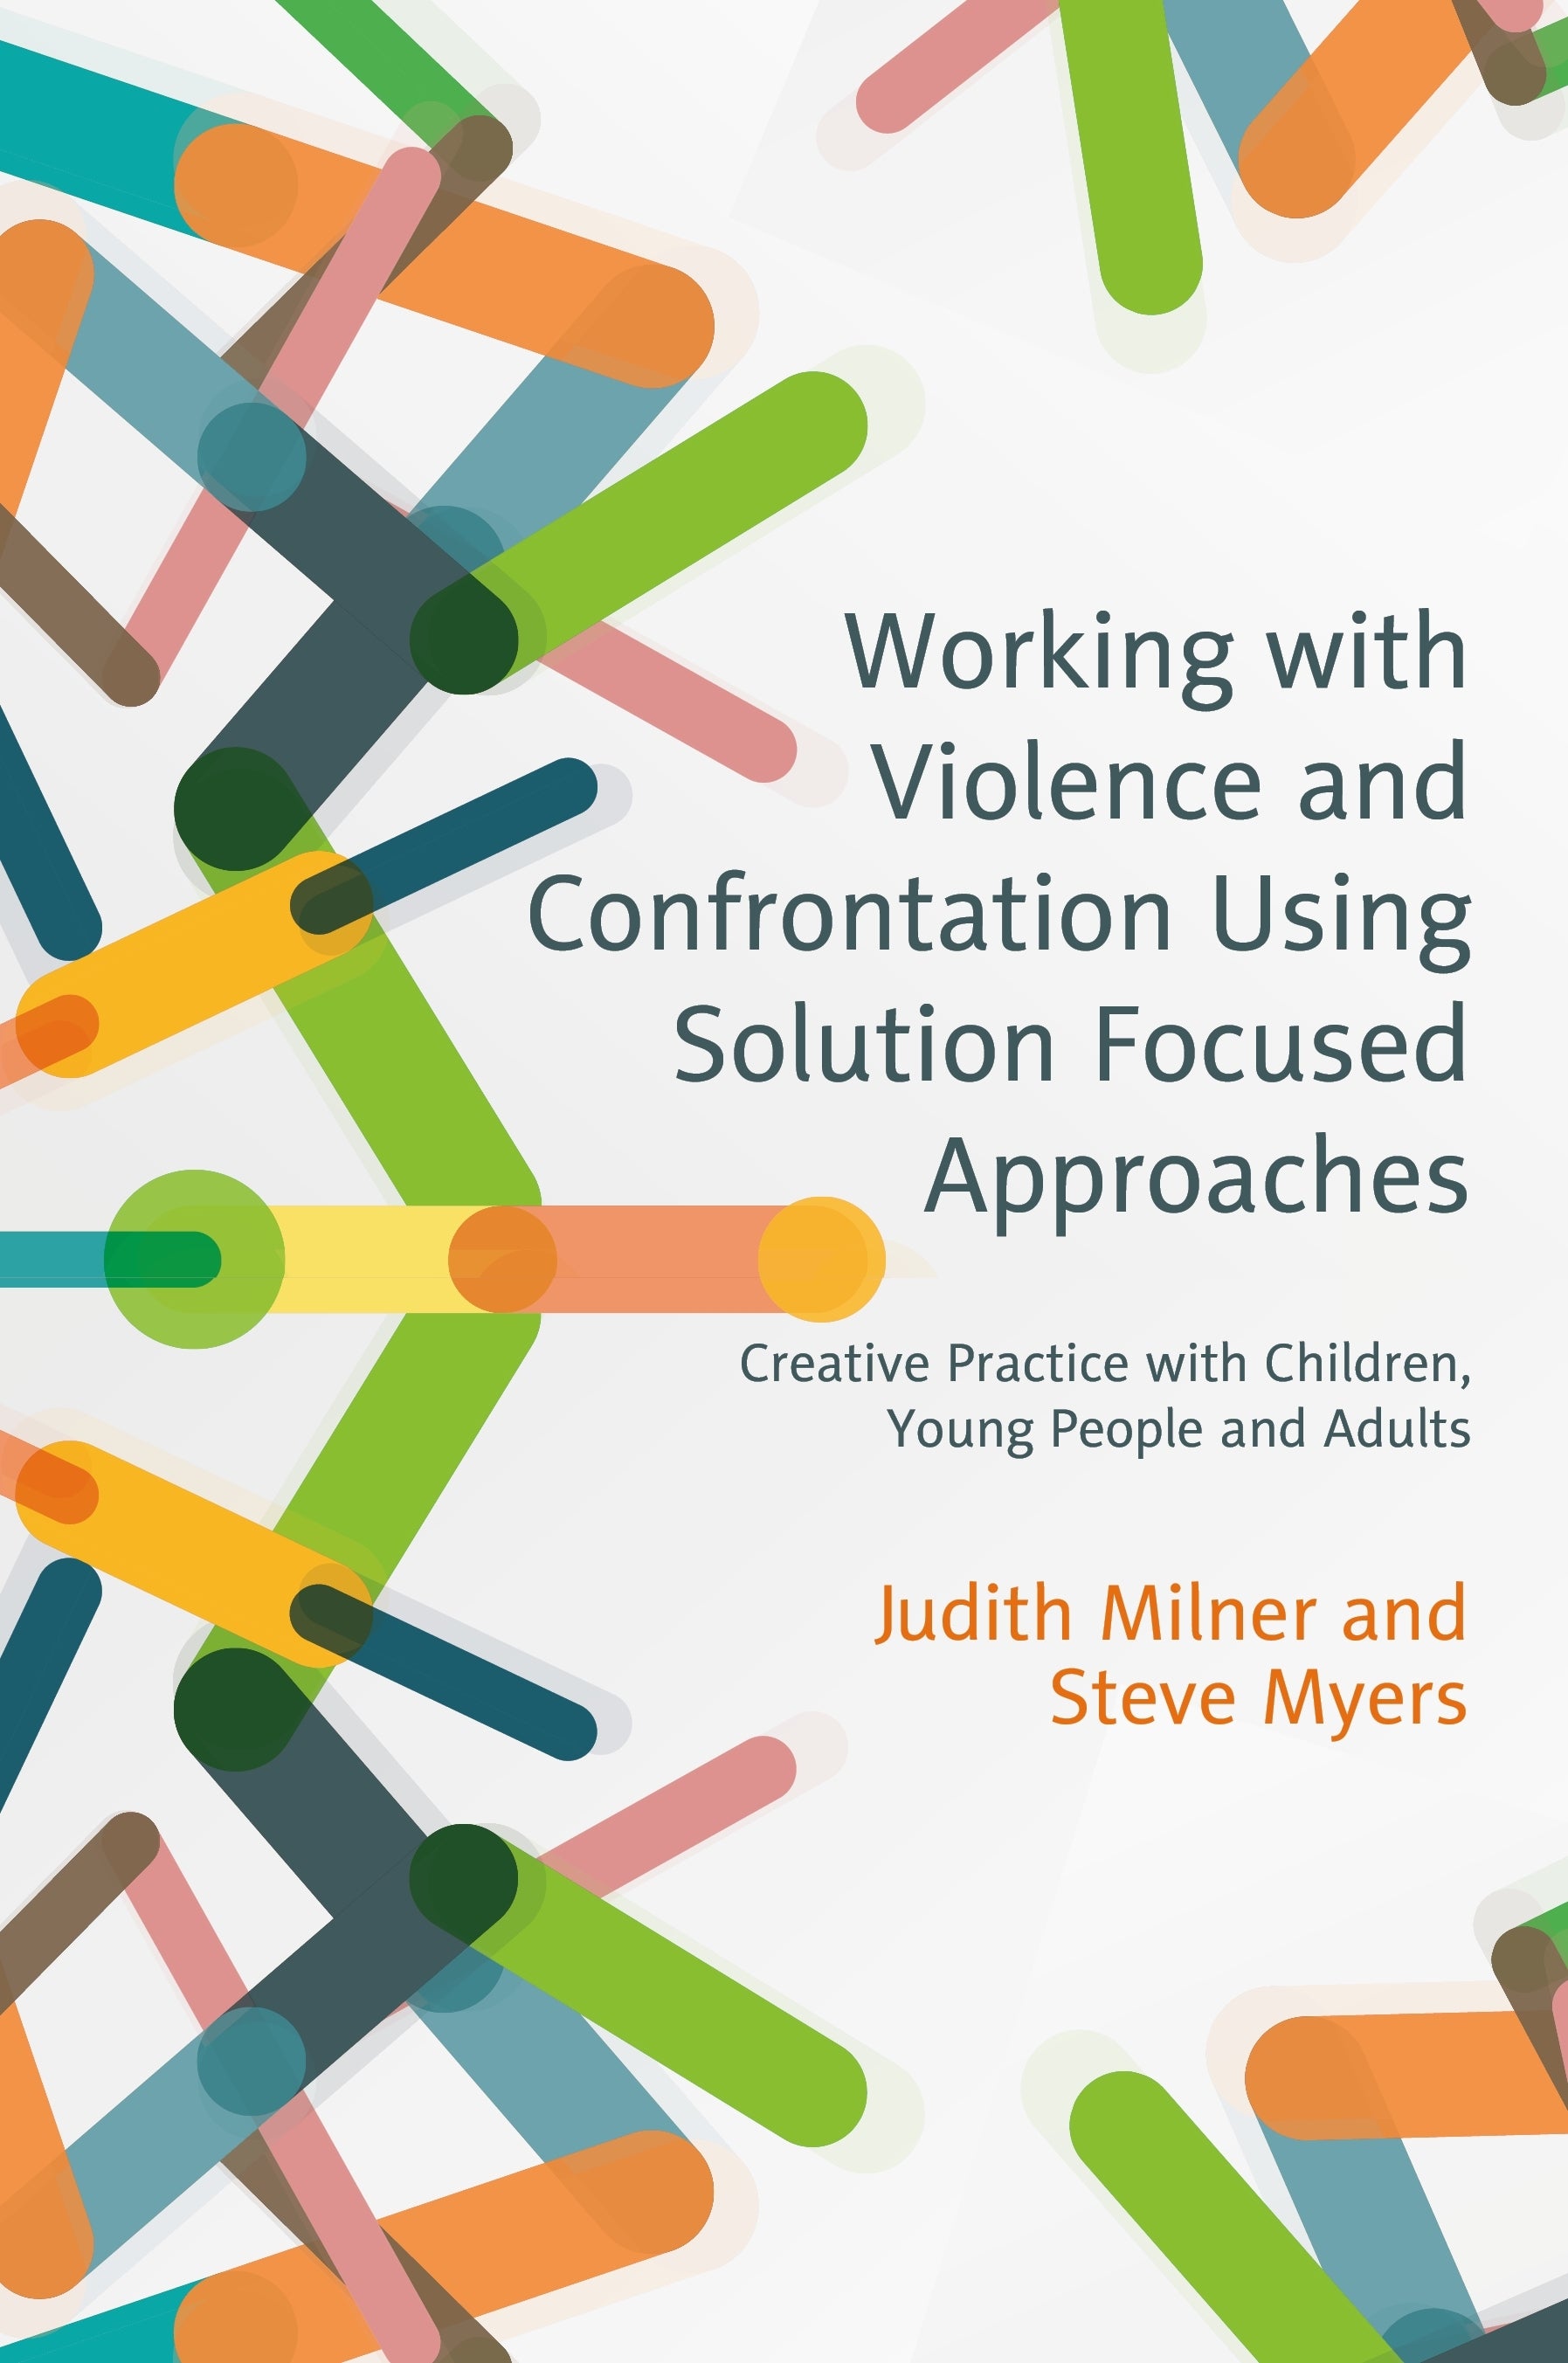 Working with Violence and Confrontation Using Solution Focused Approaches by Judith Milner, Steve Myers, Andrew Turnell